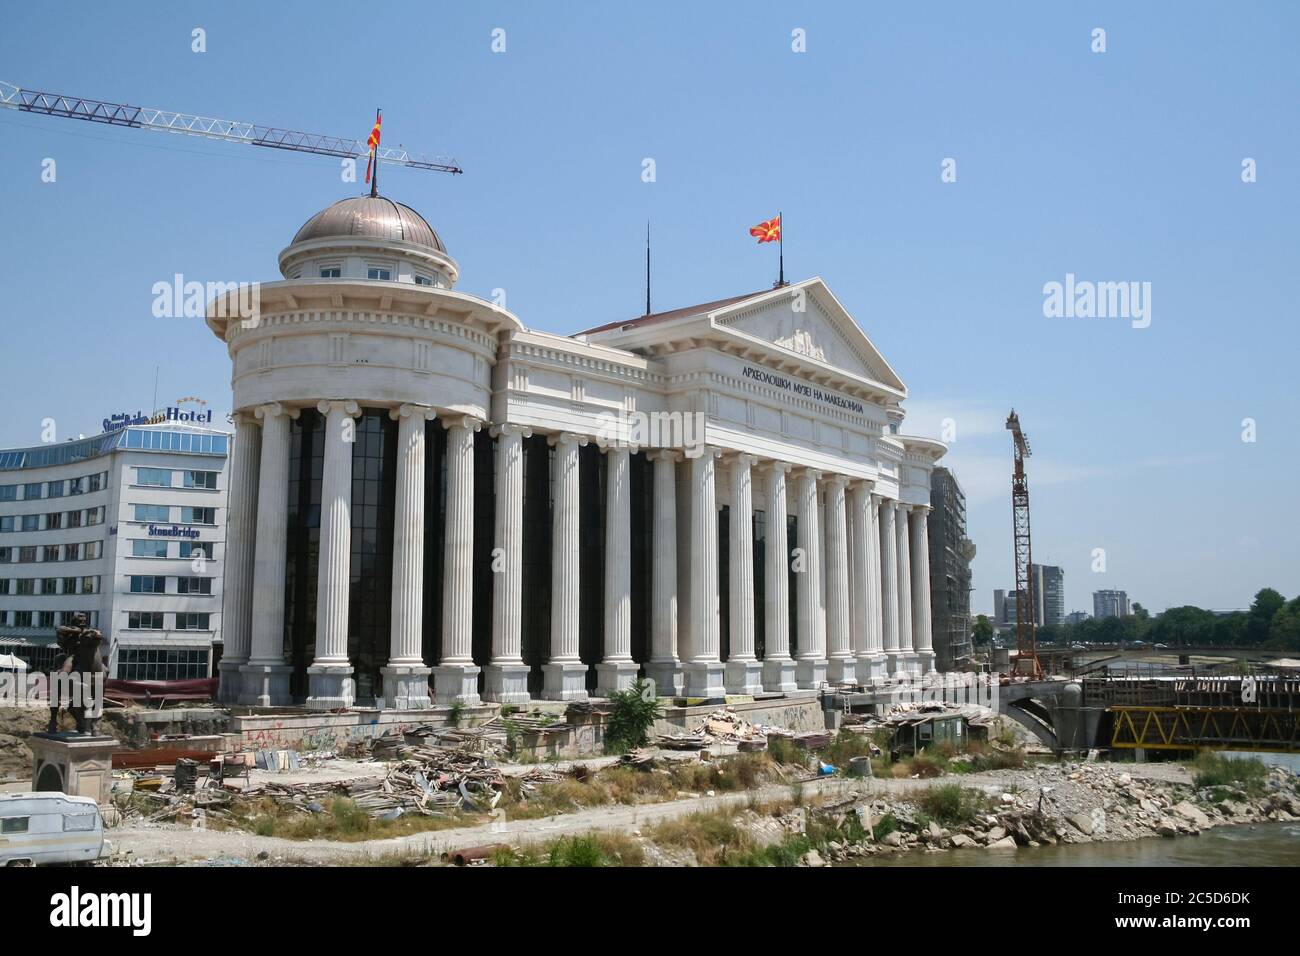 SKOPJE, MACEDONIA - JULY 7, 2007: Construction site of the Archeological museum. Part of the Skopje 2014 project the Archaeological museum is a symbol Stock Photo